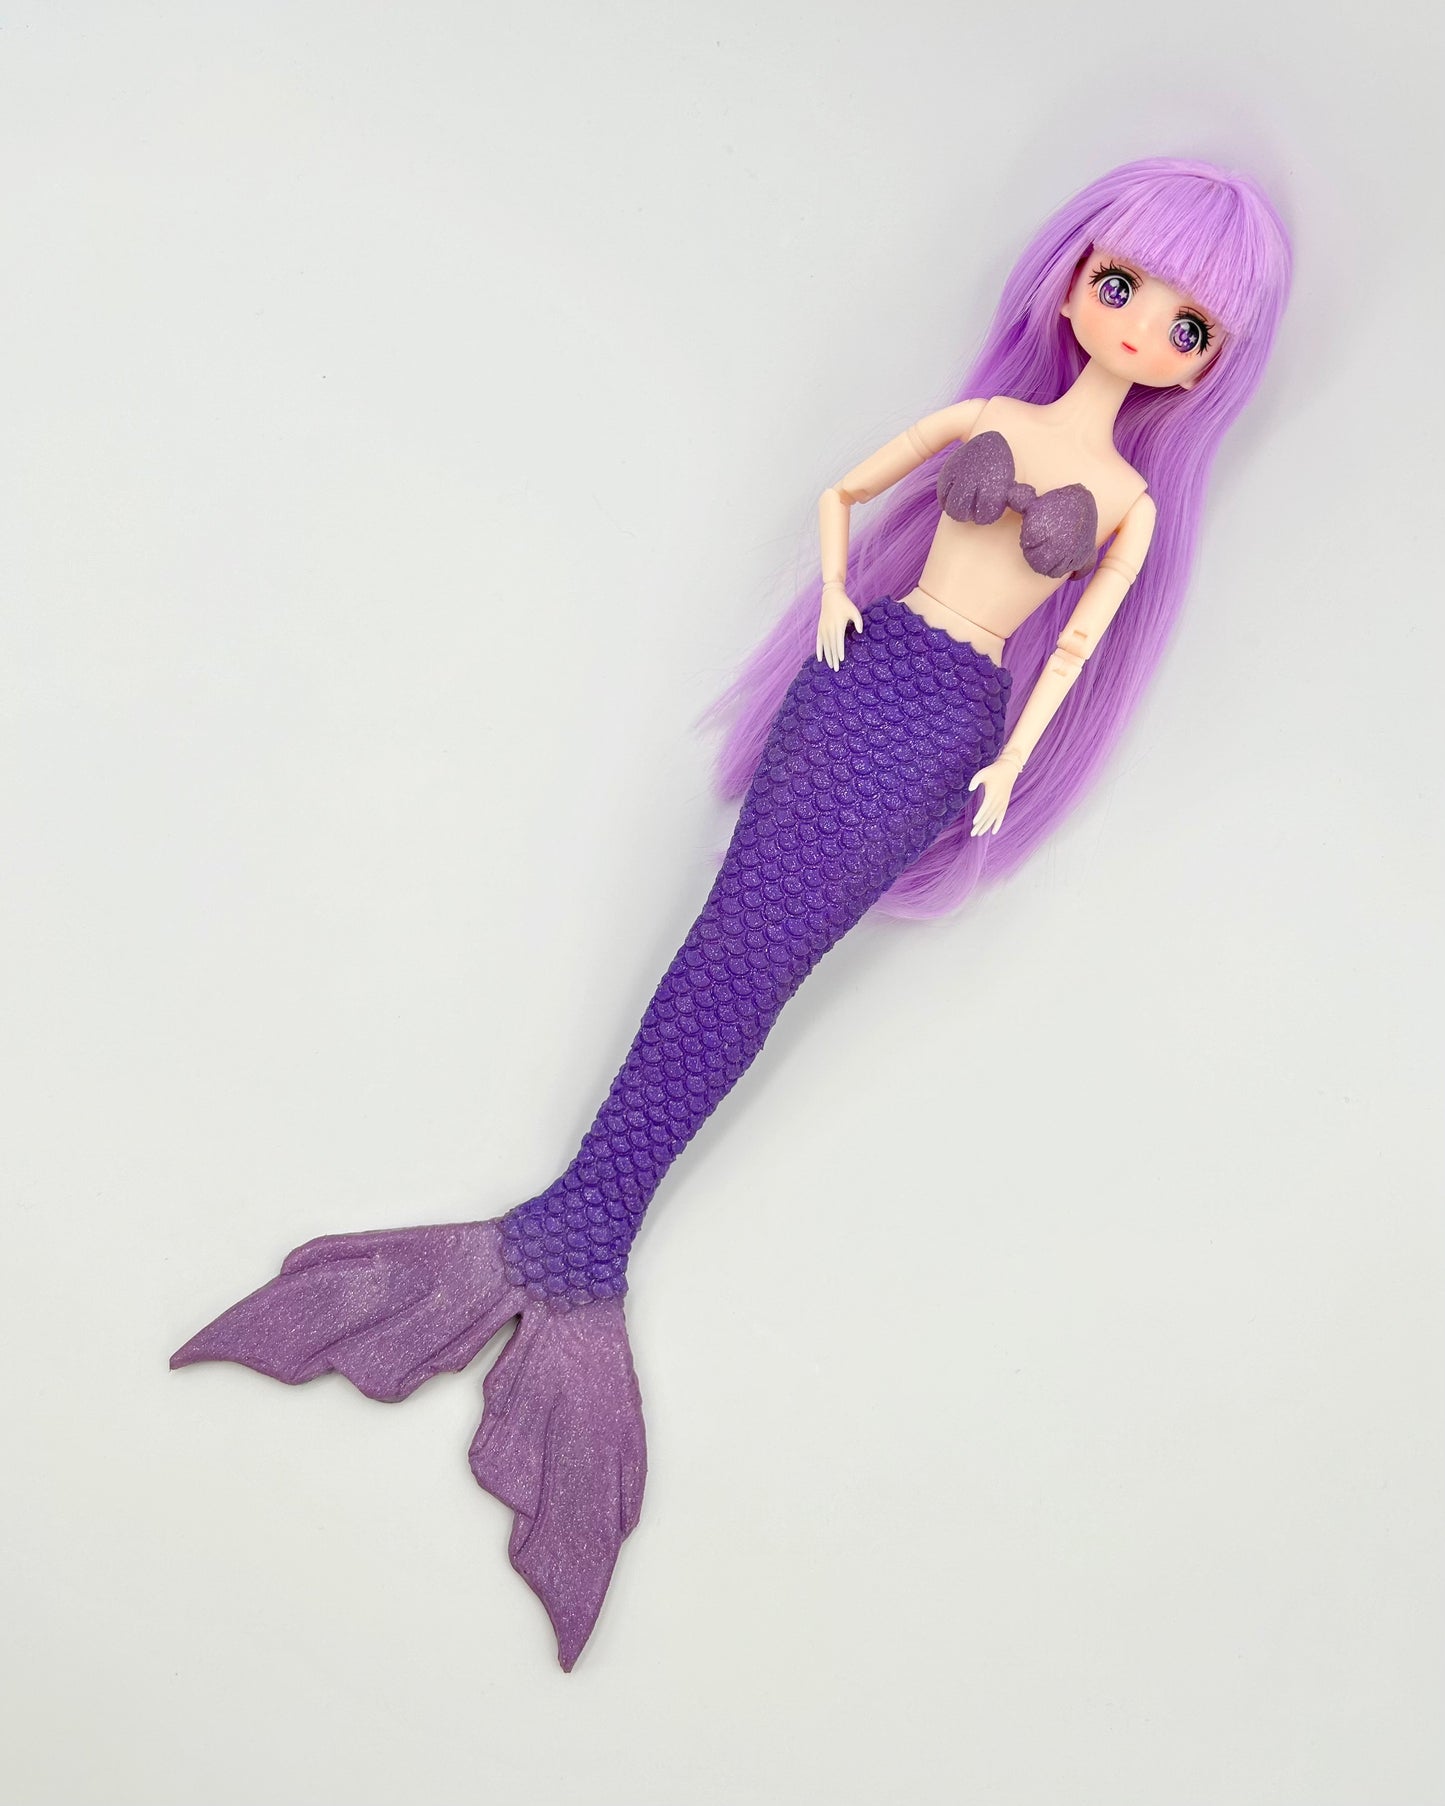 Mermaid Melody silicone mermaid tail and bra for doll (doll not included)